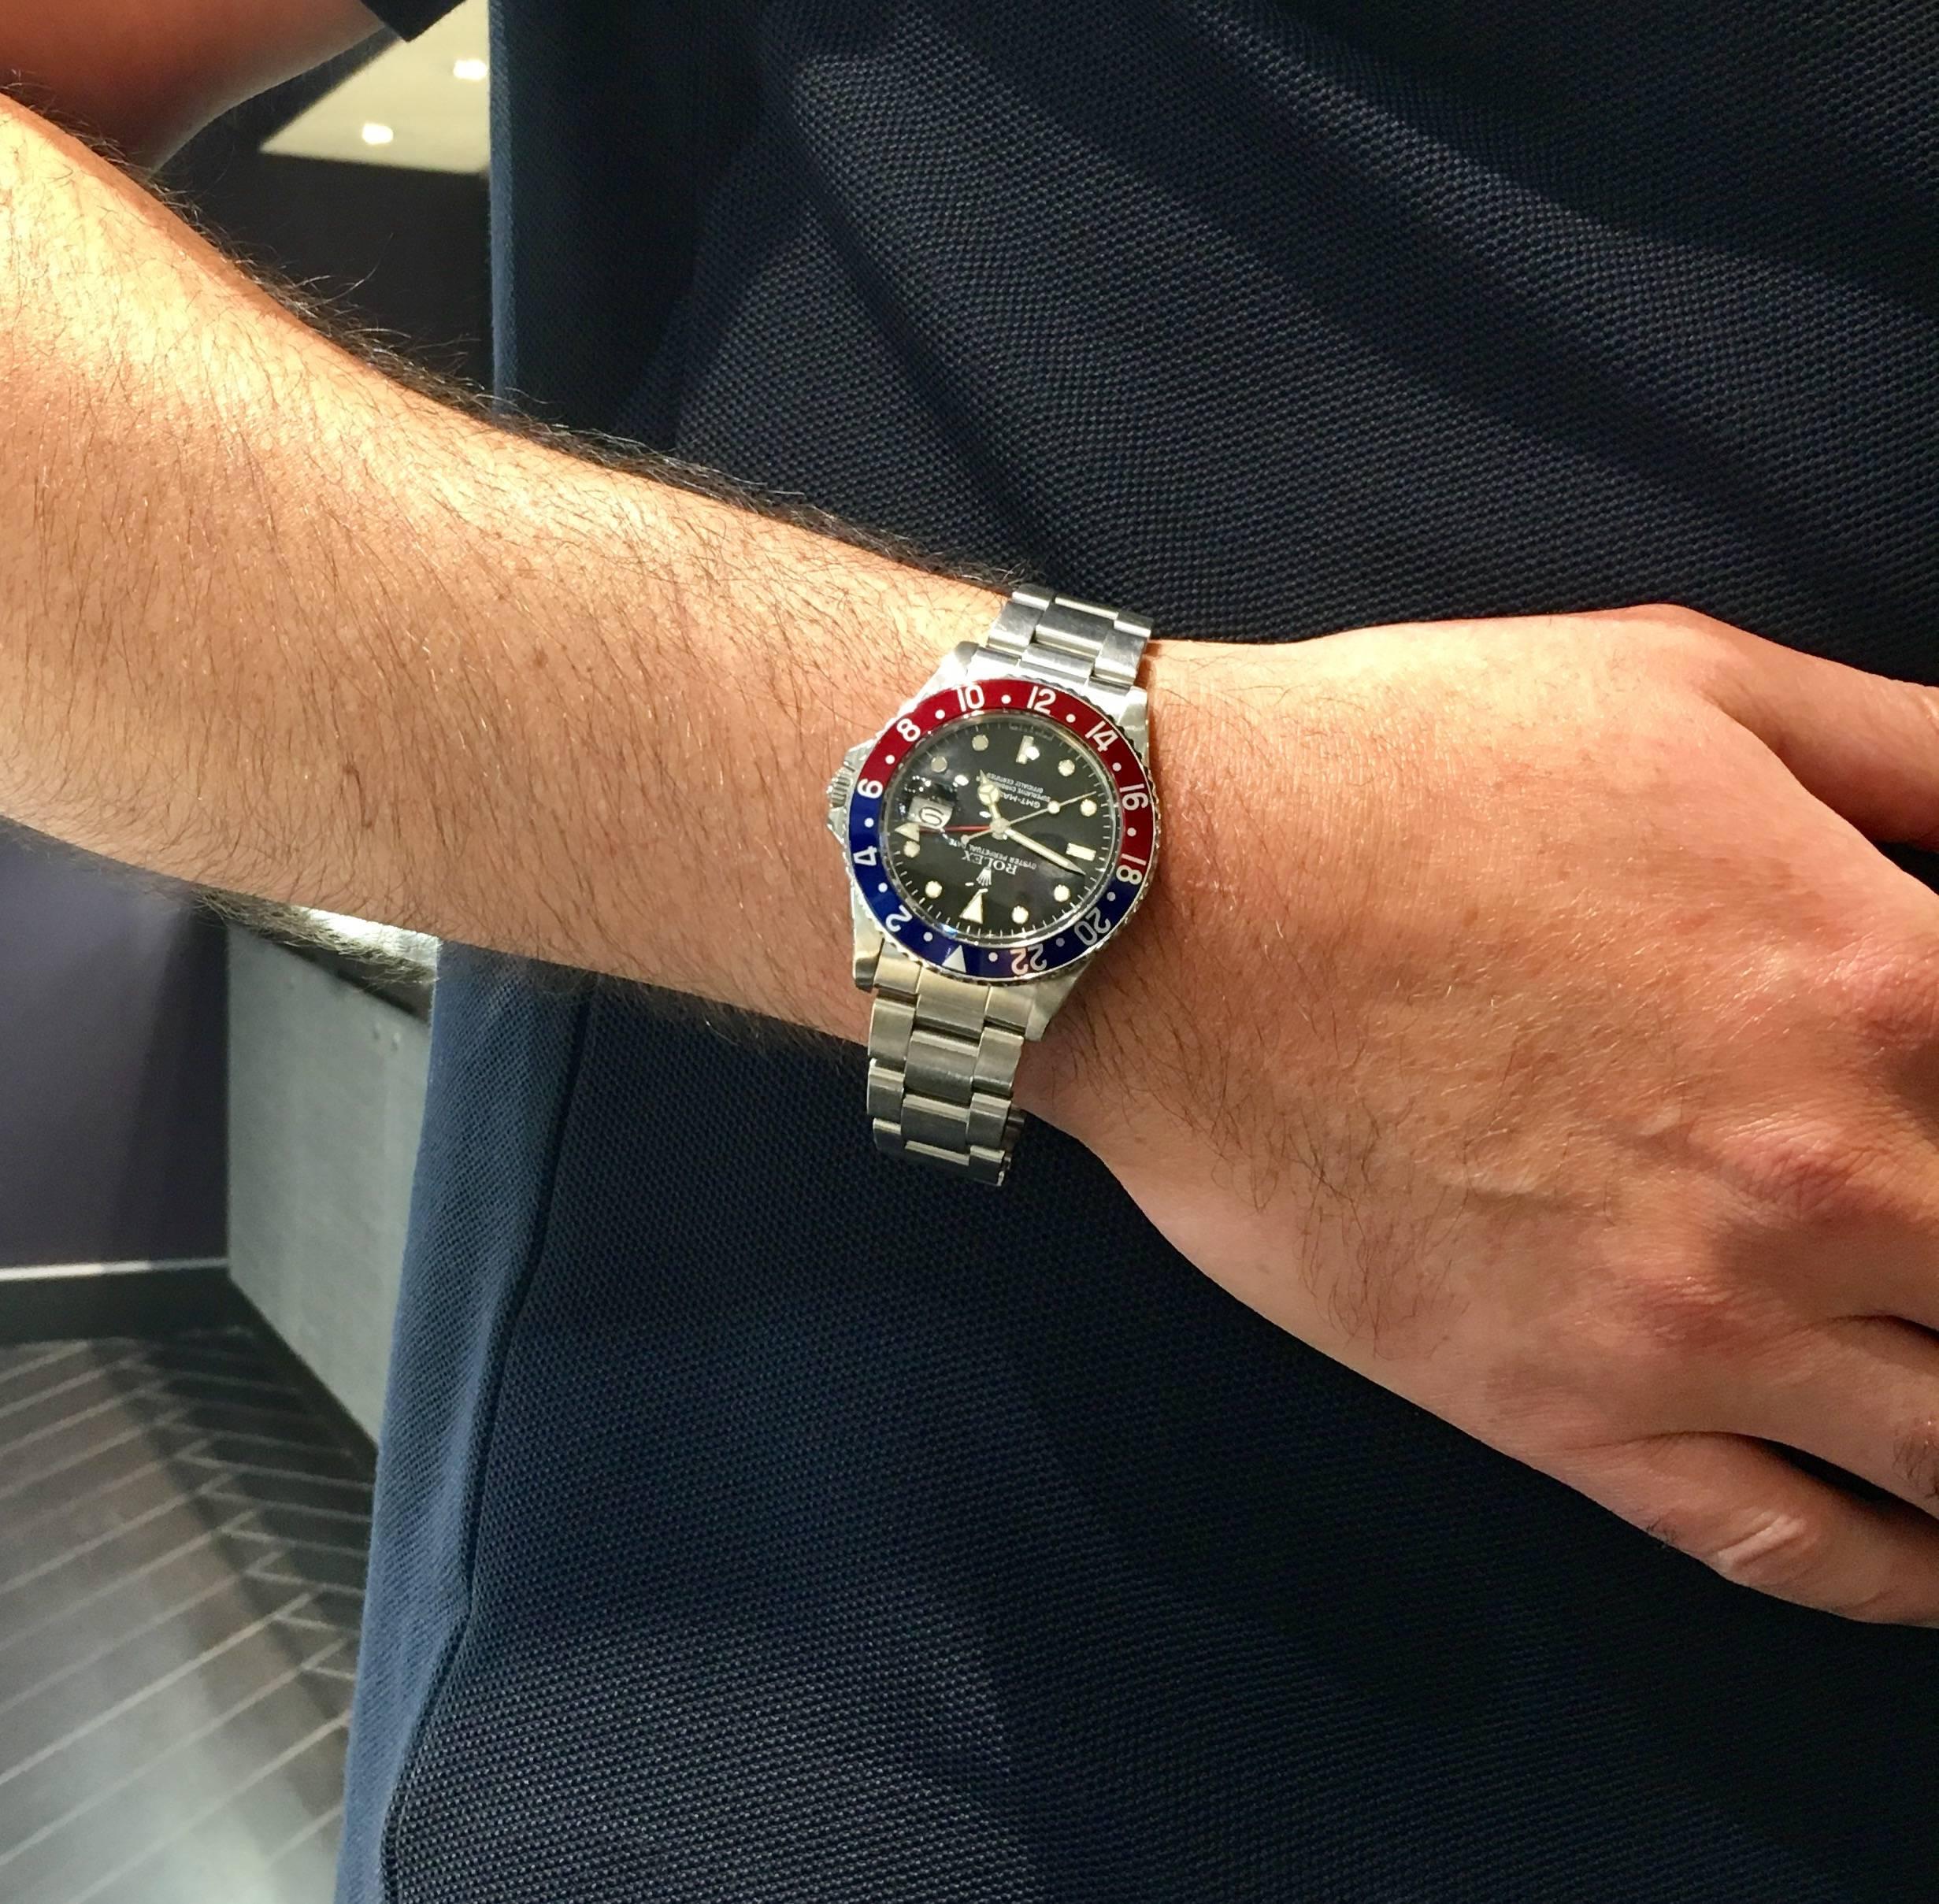 One pre-owned Rolex oyster perpetual GMT-Master in stainless steel. This classic Rolex features a black dial, a blue and red aluminum  "Pepsi bezel" insert, 20mm stainless steel oyster bracelet with 15 links including end piece black. 